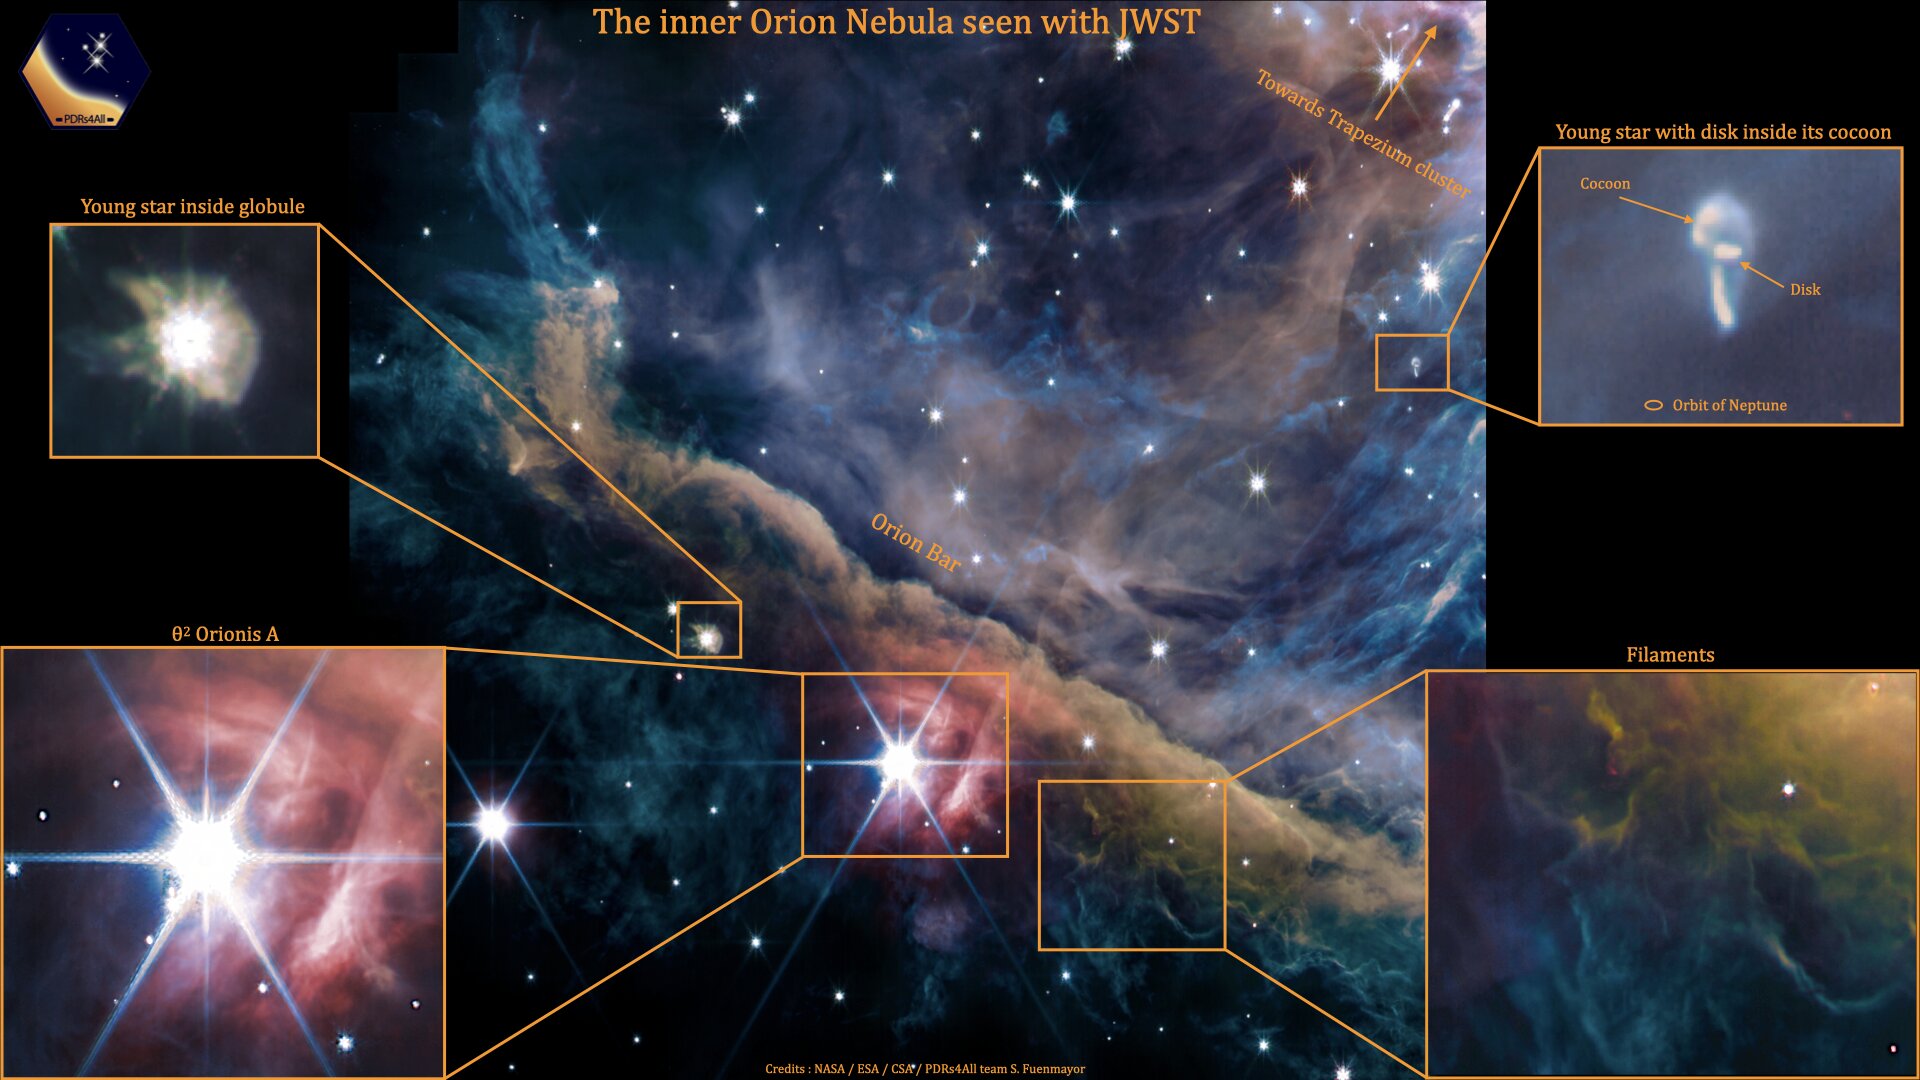 James Webb Space Telescope Image with annotations of the Orion Nebula. Image Credit: Image Credit: NASA, ESA, CSA, Data reduction and analysis : PDRs4All ERS Team; graphical processing S. Fuenmayor.